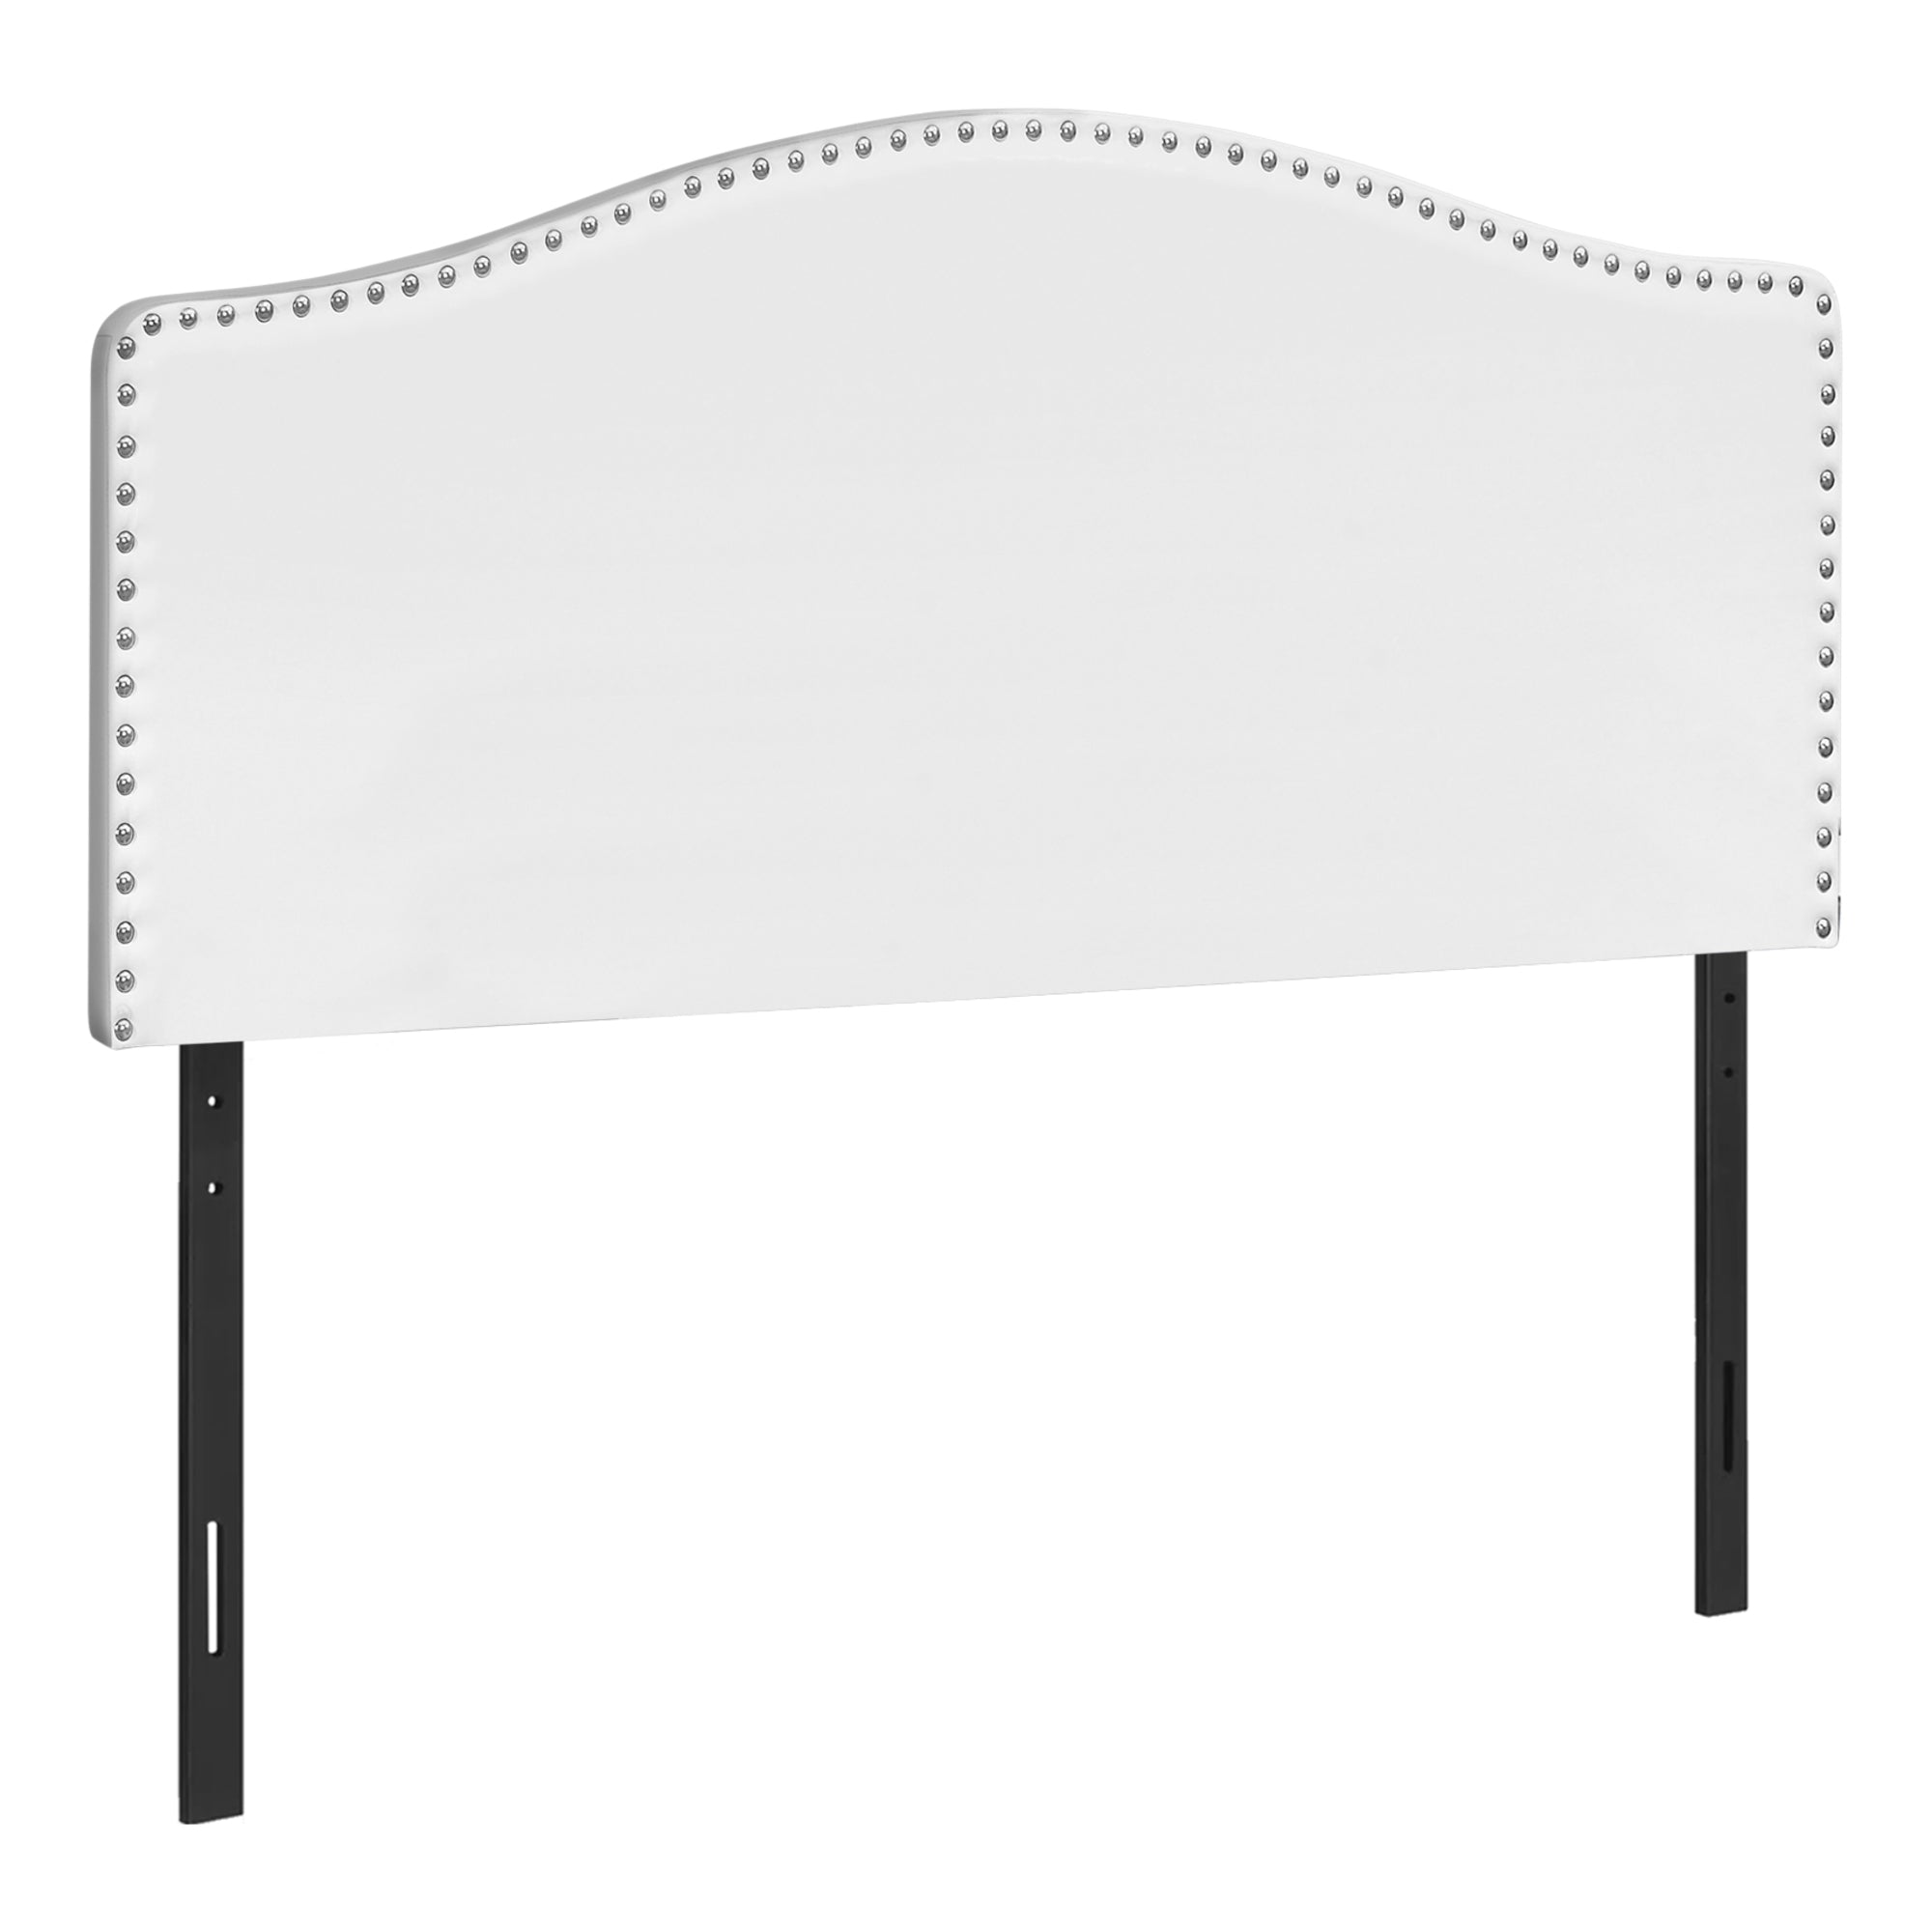 MN-536012Q    Headboard, Bedroom, Queen Size, Upholstered, Leather Look, Wooden Frame, White, Black, Contemporary, Modern